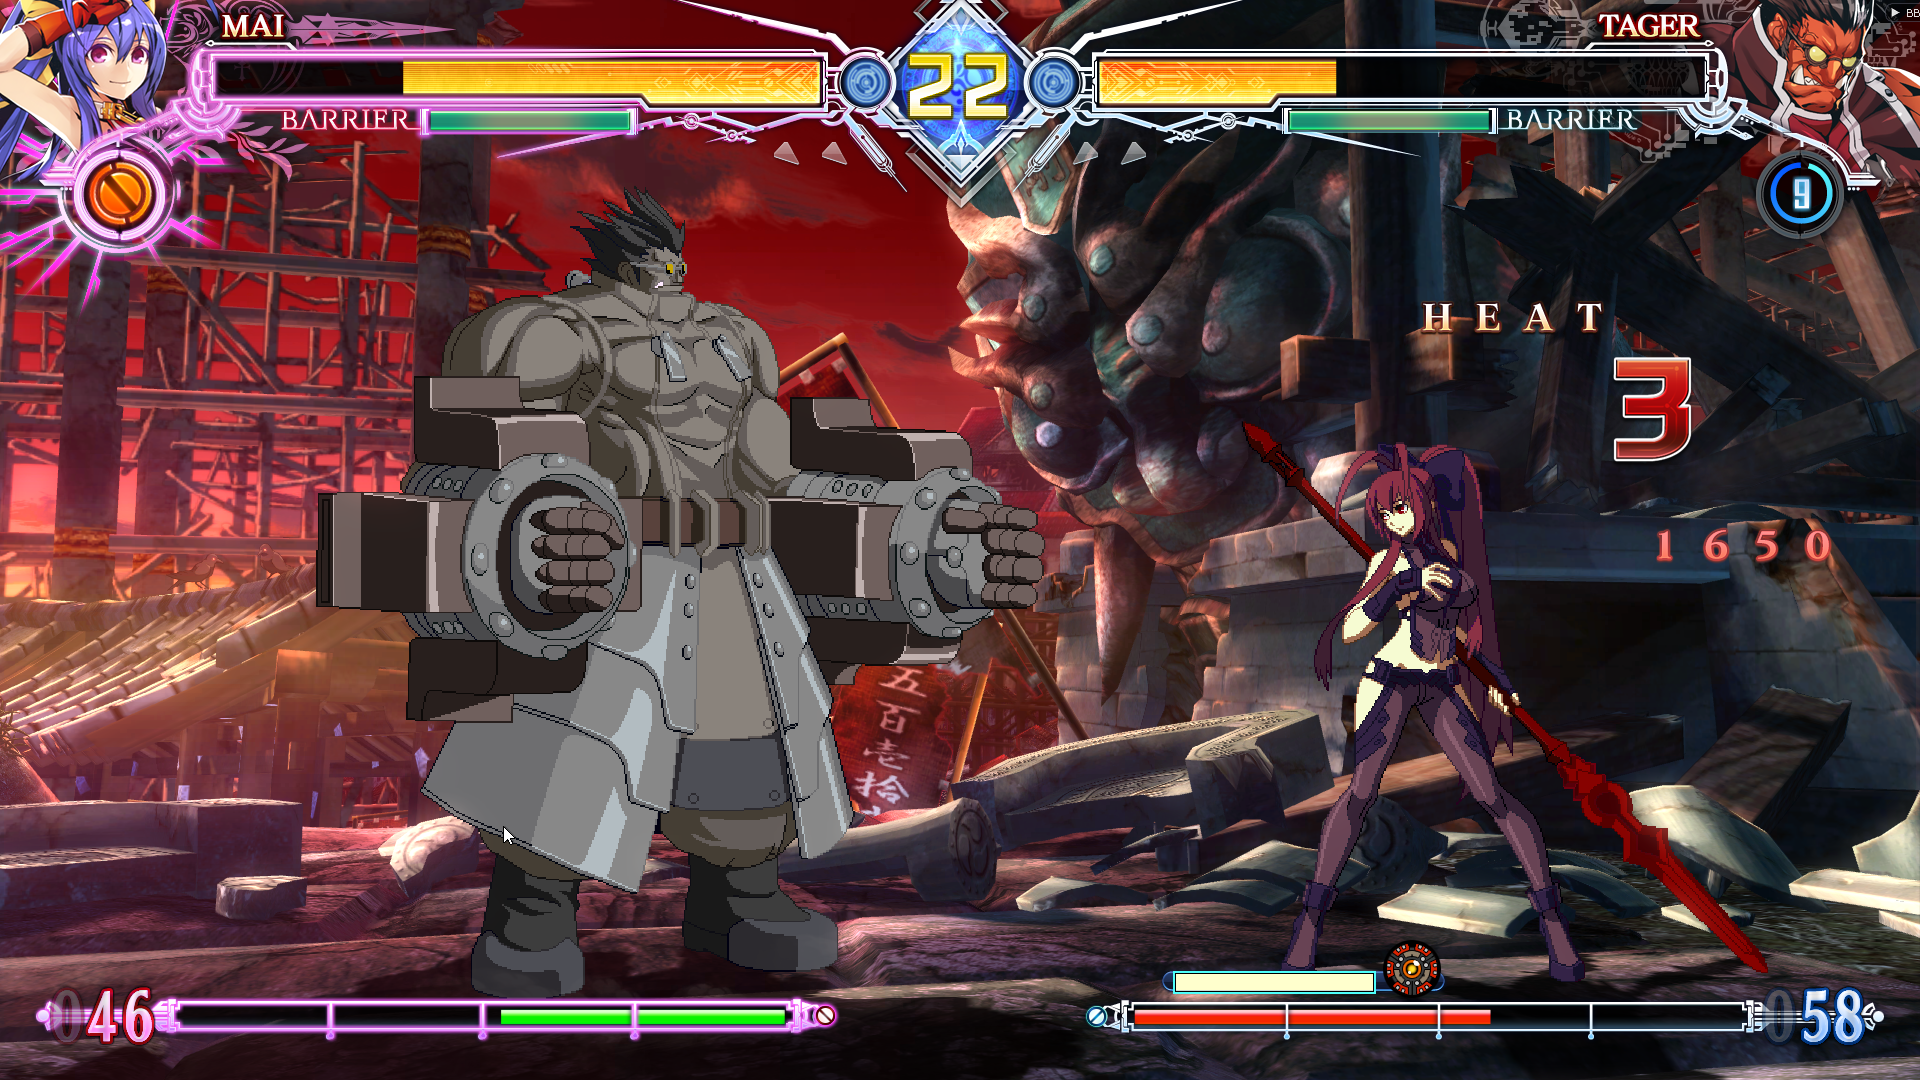 Download mugen characters blazblue central fiction